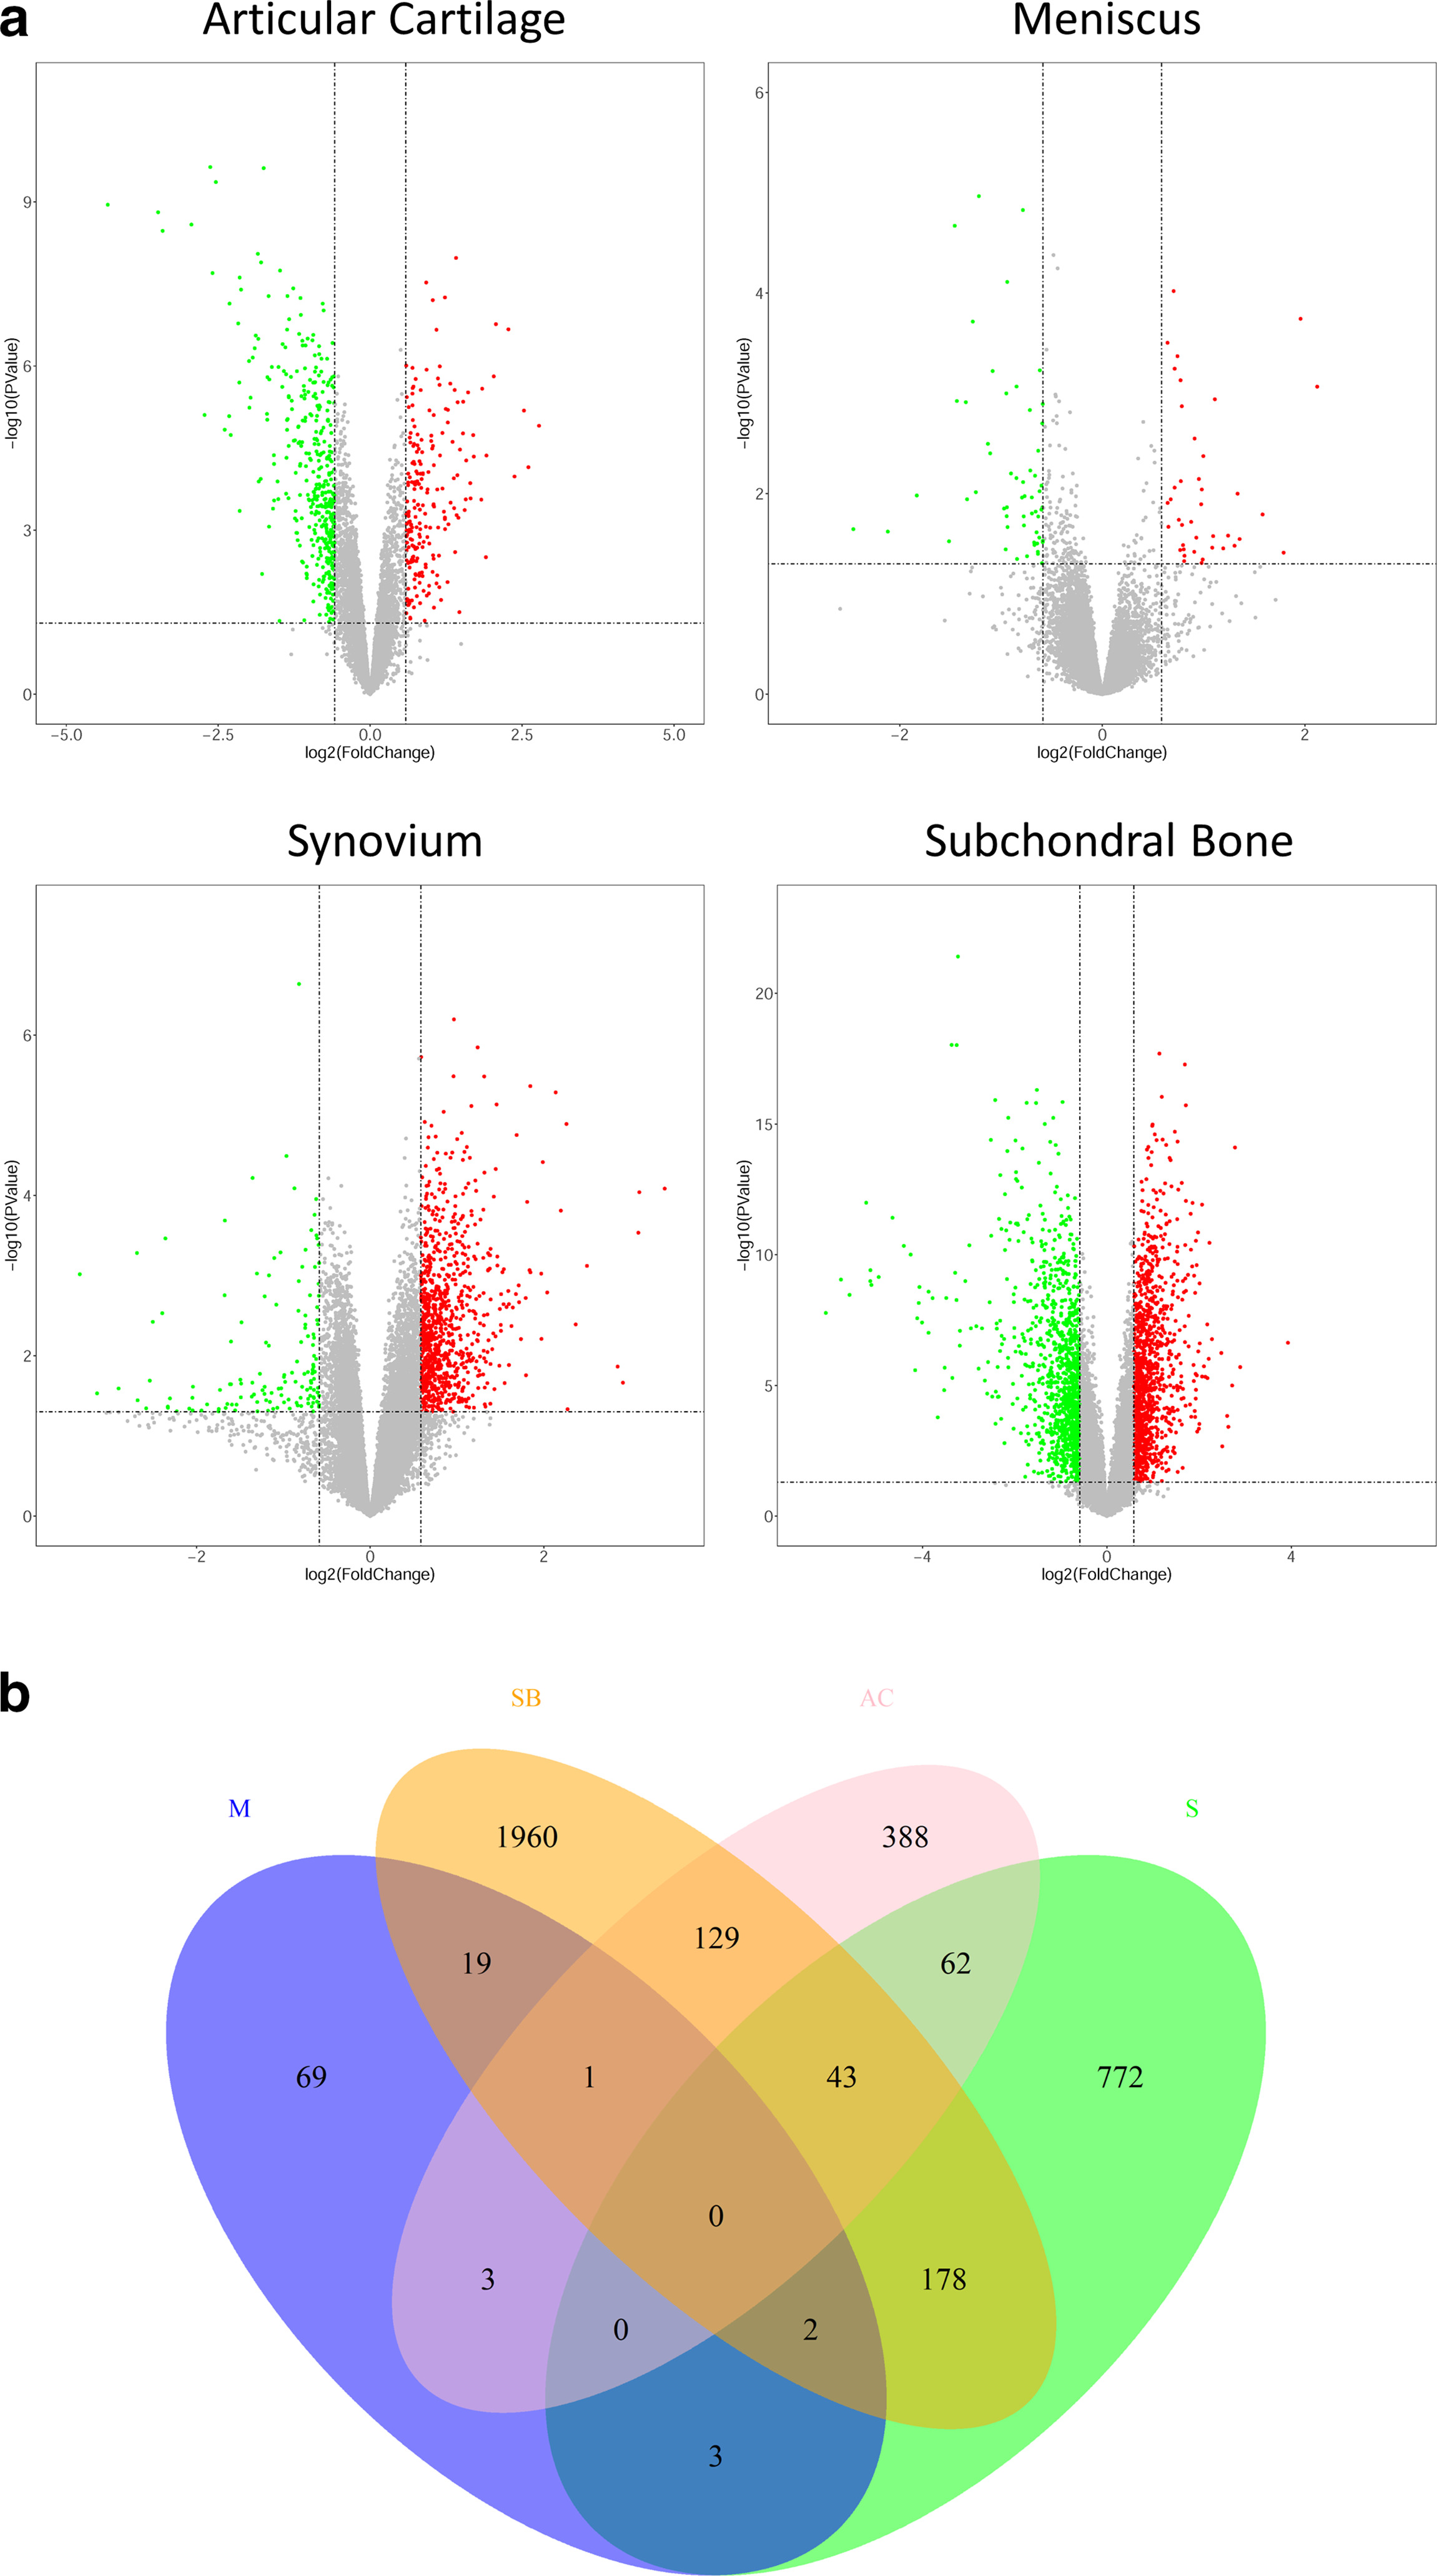 Fig. 2 
            Statistics of differentially expressed genes in all tissues. a) Volcano plot. Red dots indicate upregulated genes and green dots indicate downregulated genes. b) Venn diagram of differentially expressed genes in the four tissues. AC, articular cartilage; M, meniscus; S, synovium; SB, subchondral bone.
          